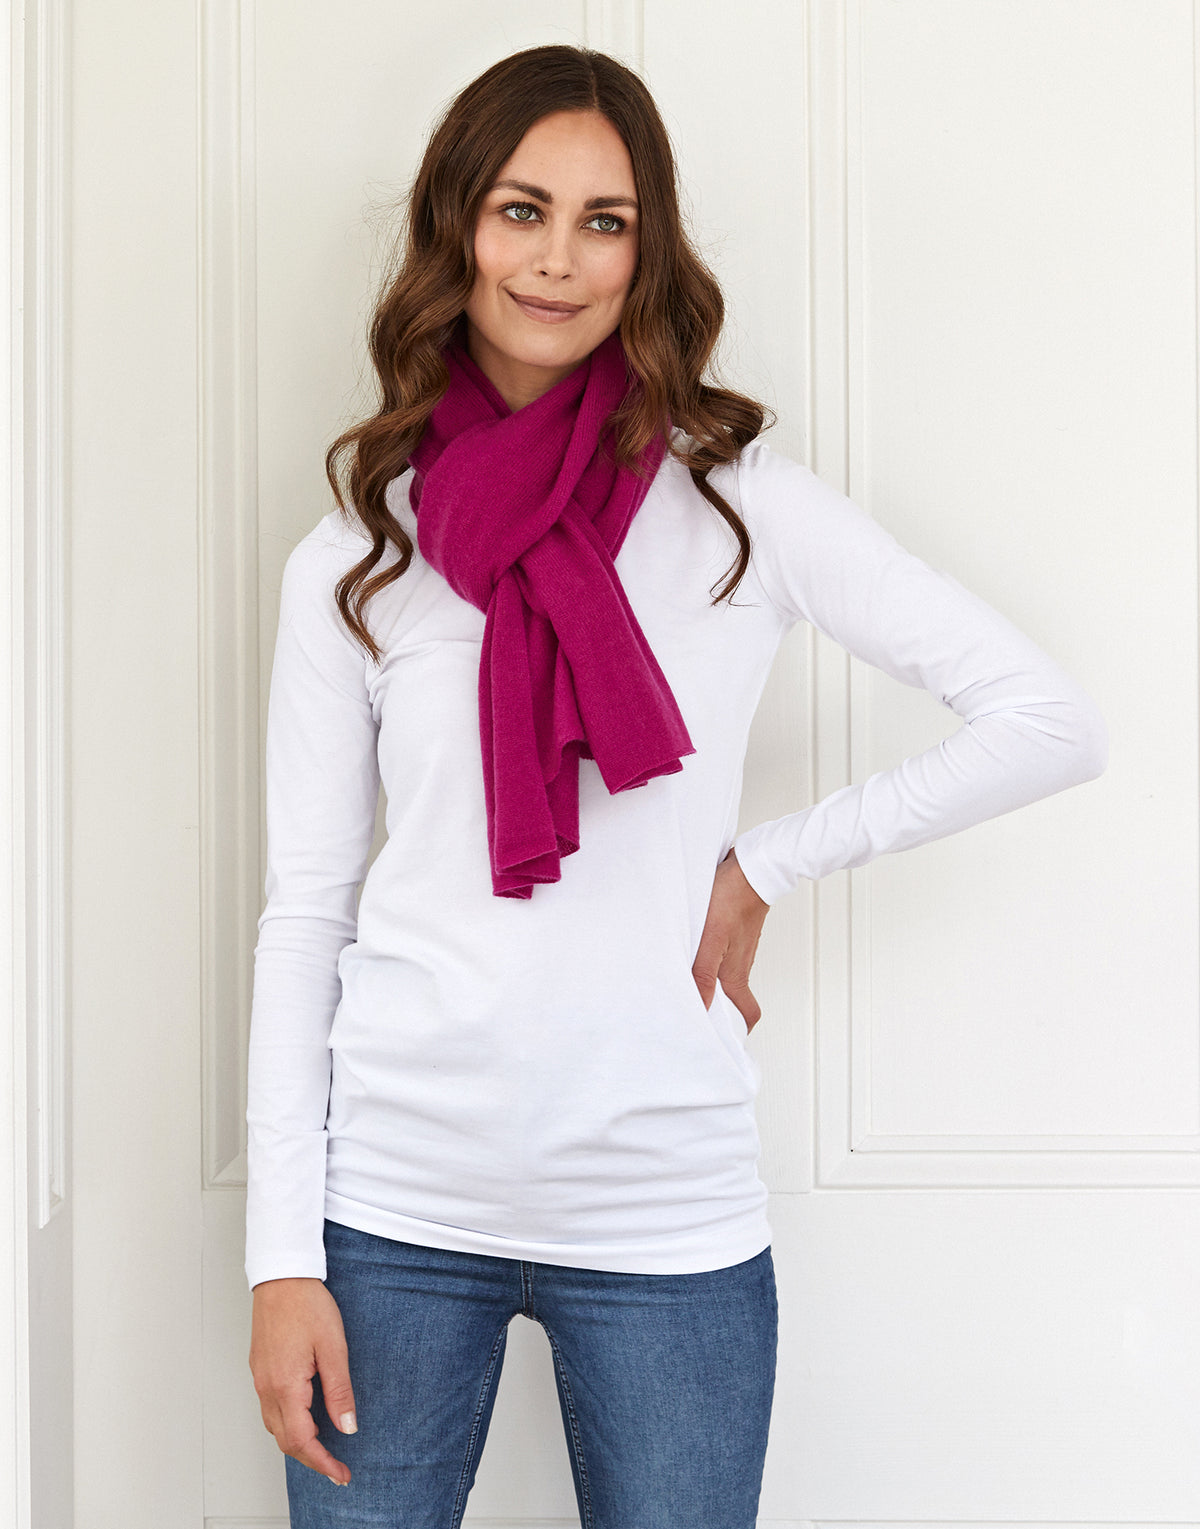 lucy 4-way cashmere poncho - berry